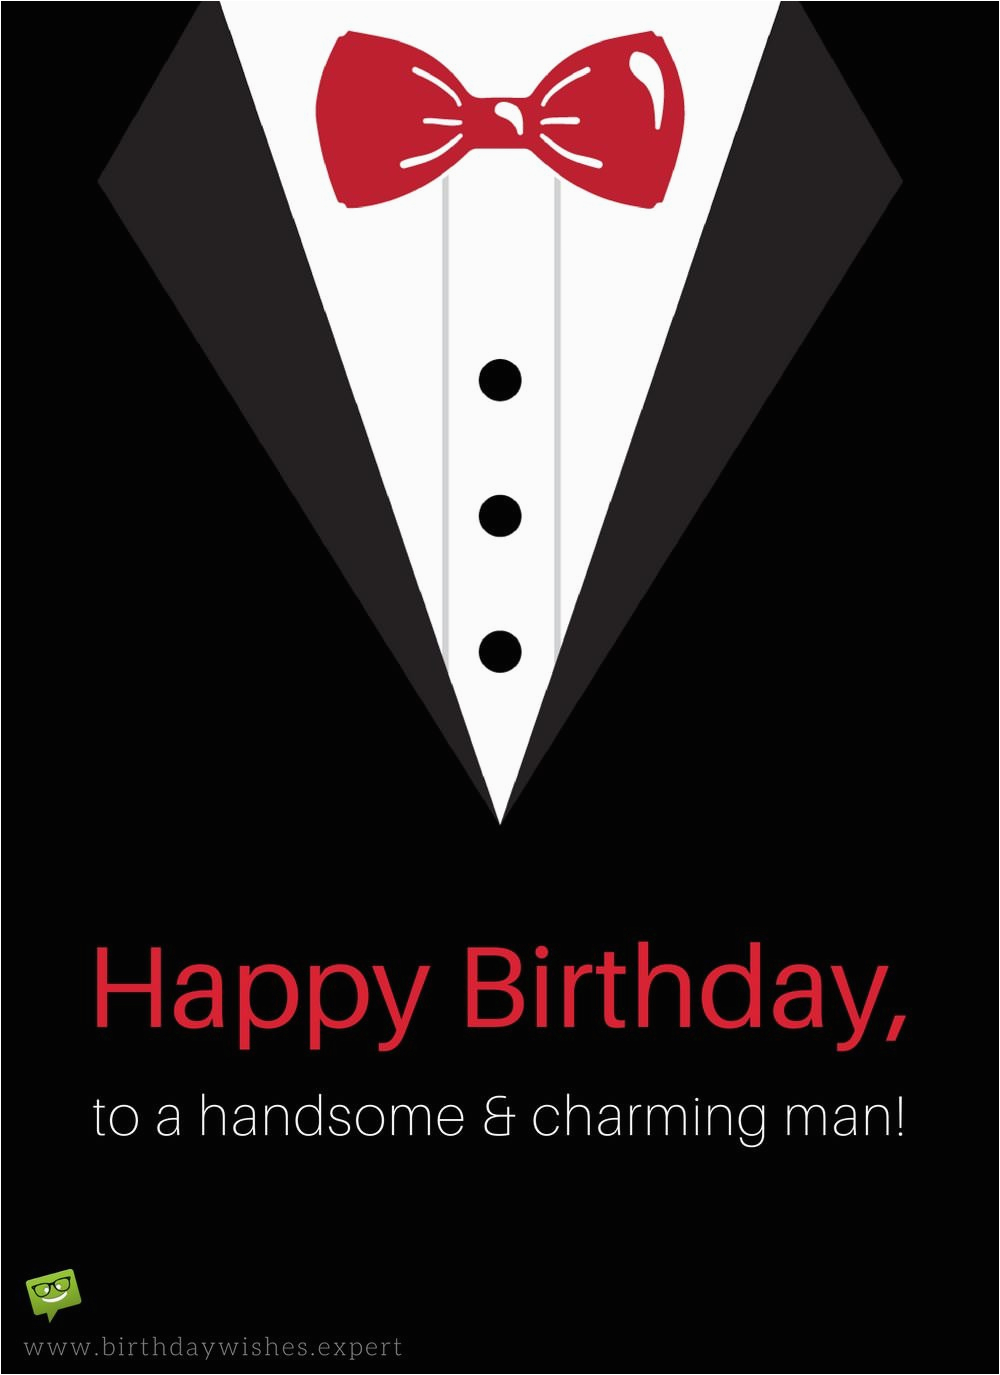 Happy Birthday Cards for A Man 50 Romantic Birthday Wishes for Your Husband